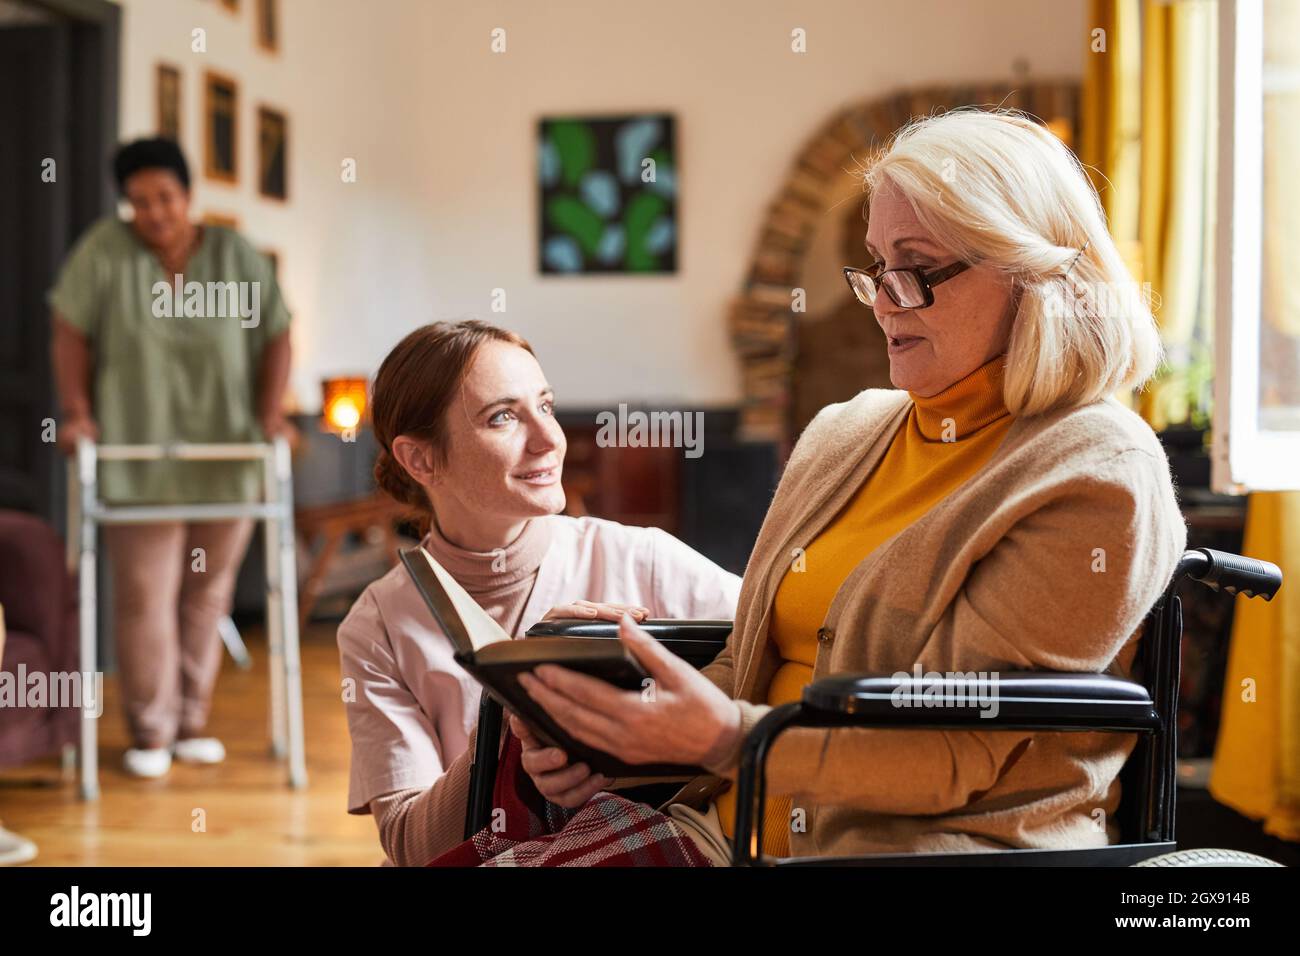 Portrait of young woman assisting senior woman in wheelchair at retirement home, copy space Stock Photo